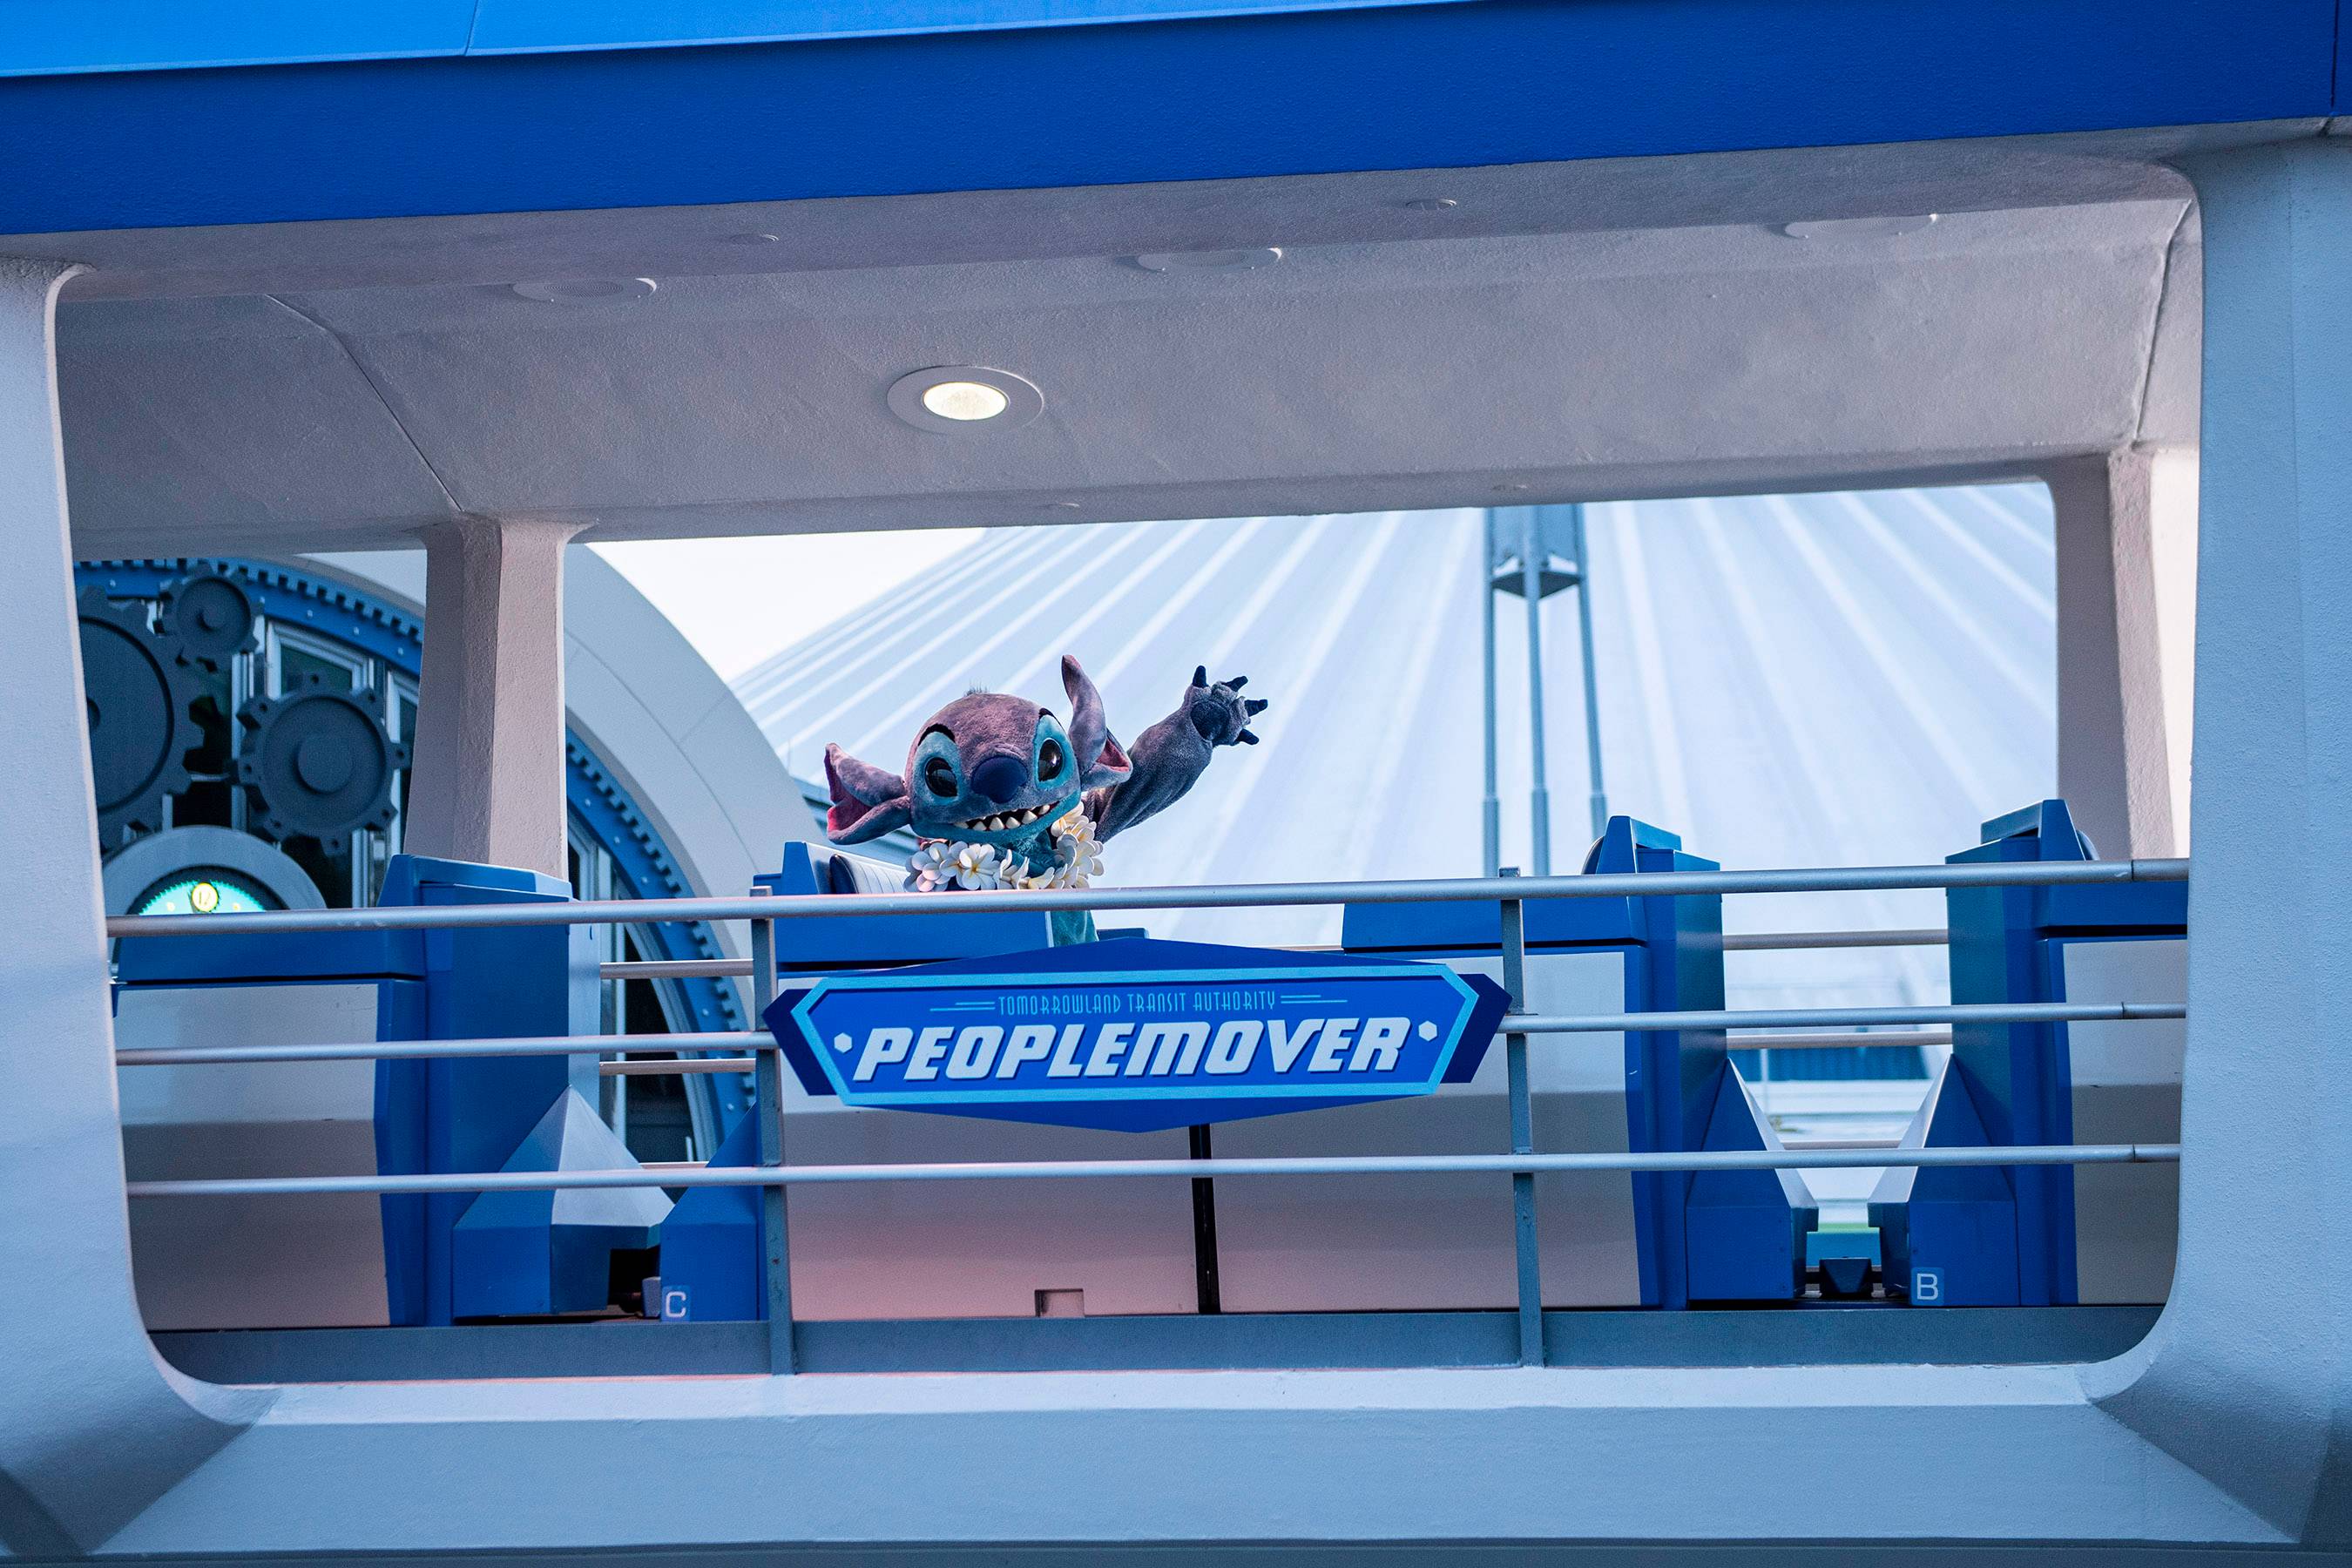 Stitch rides the Tommorowland Transit Authority PeopleMover